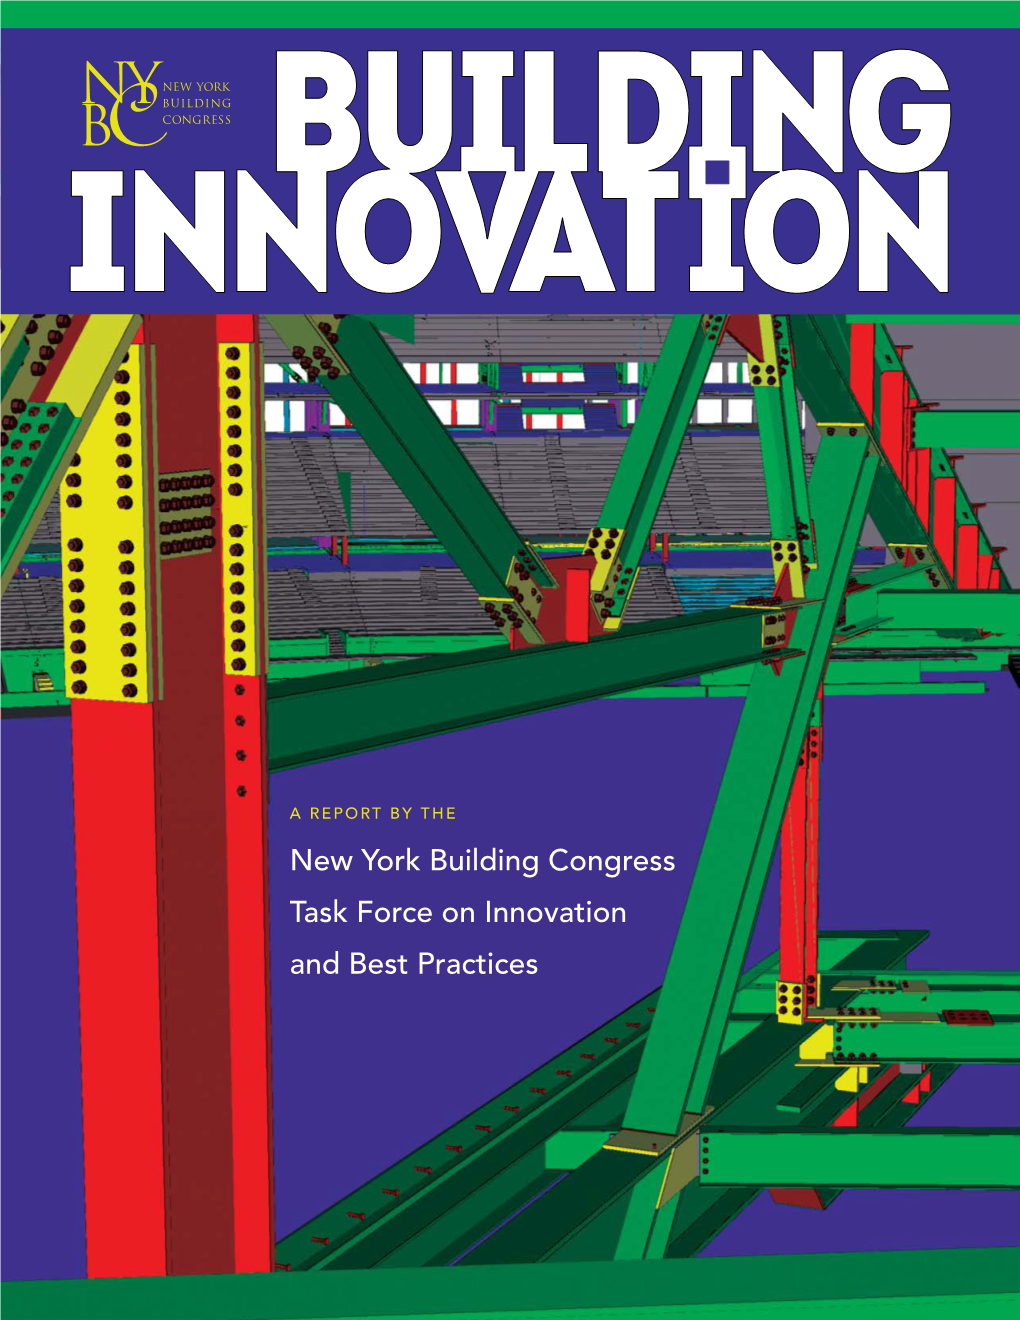 New York Building Congress Task Force on Innovation and Best Practices Message from the Chairman